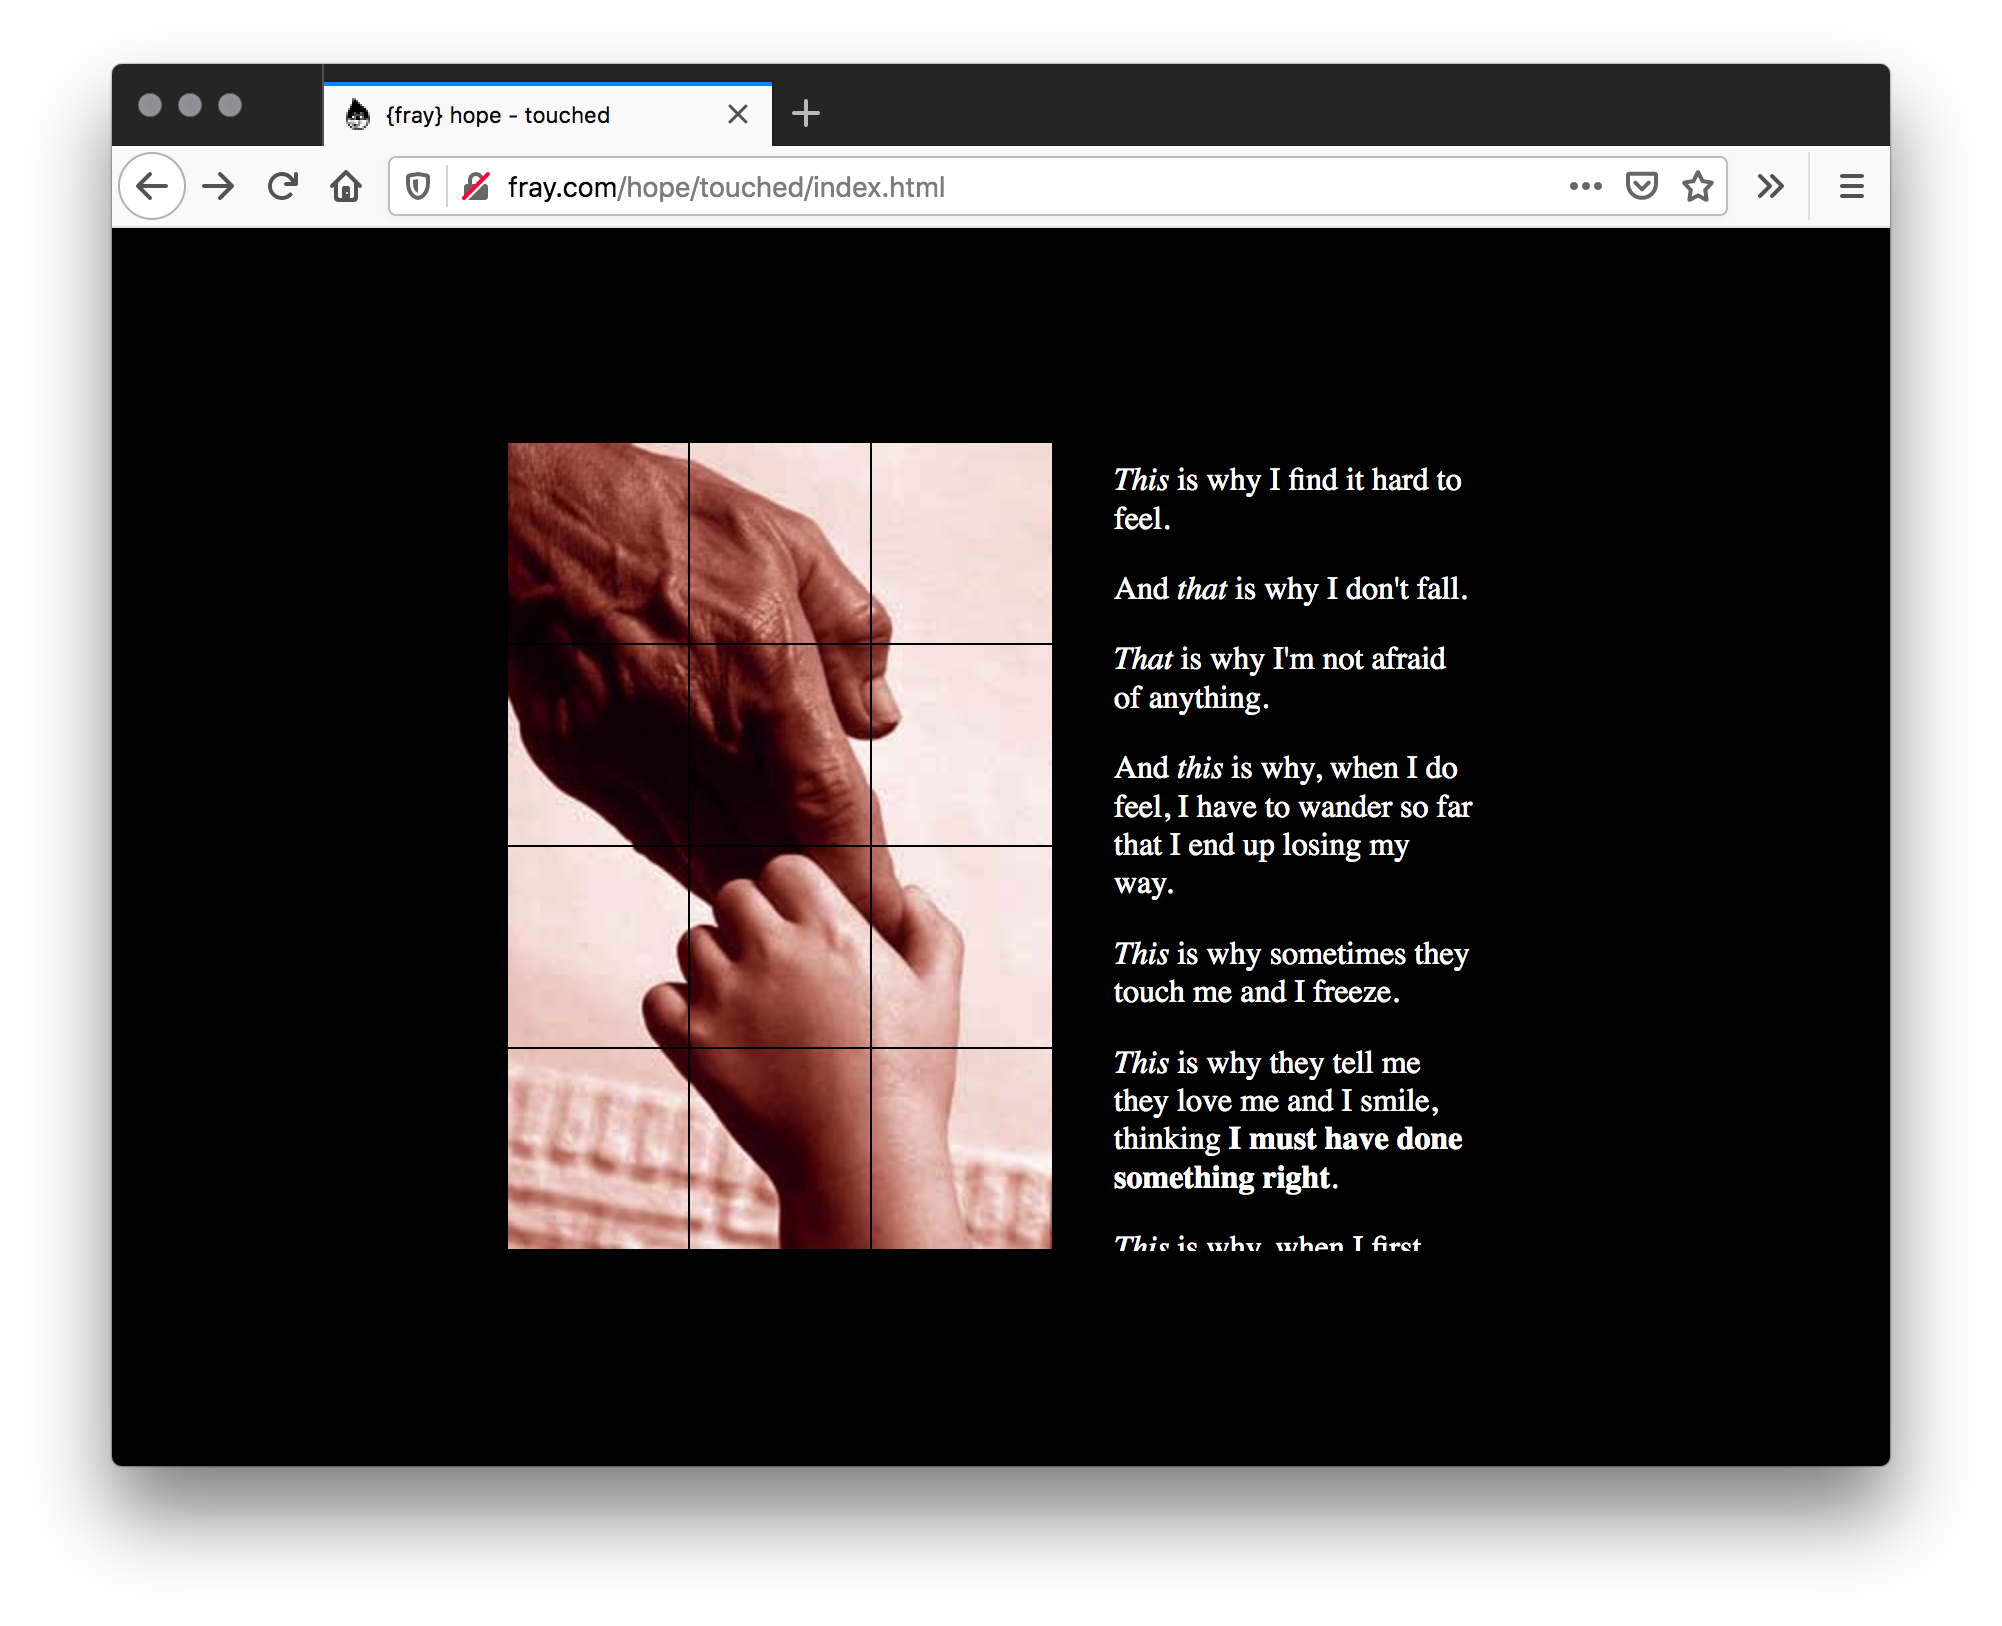 Screenshot of black webpage with a tiled image of a baby's hand grabbing the fingers old and wrinkled hand. The right has paragraphs of white text, with some words italicized or bolded.